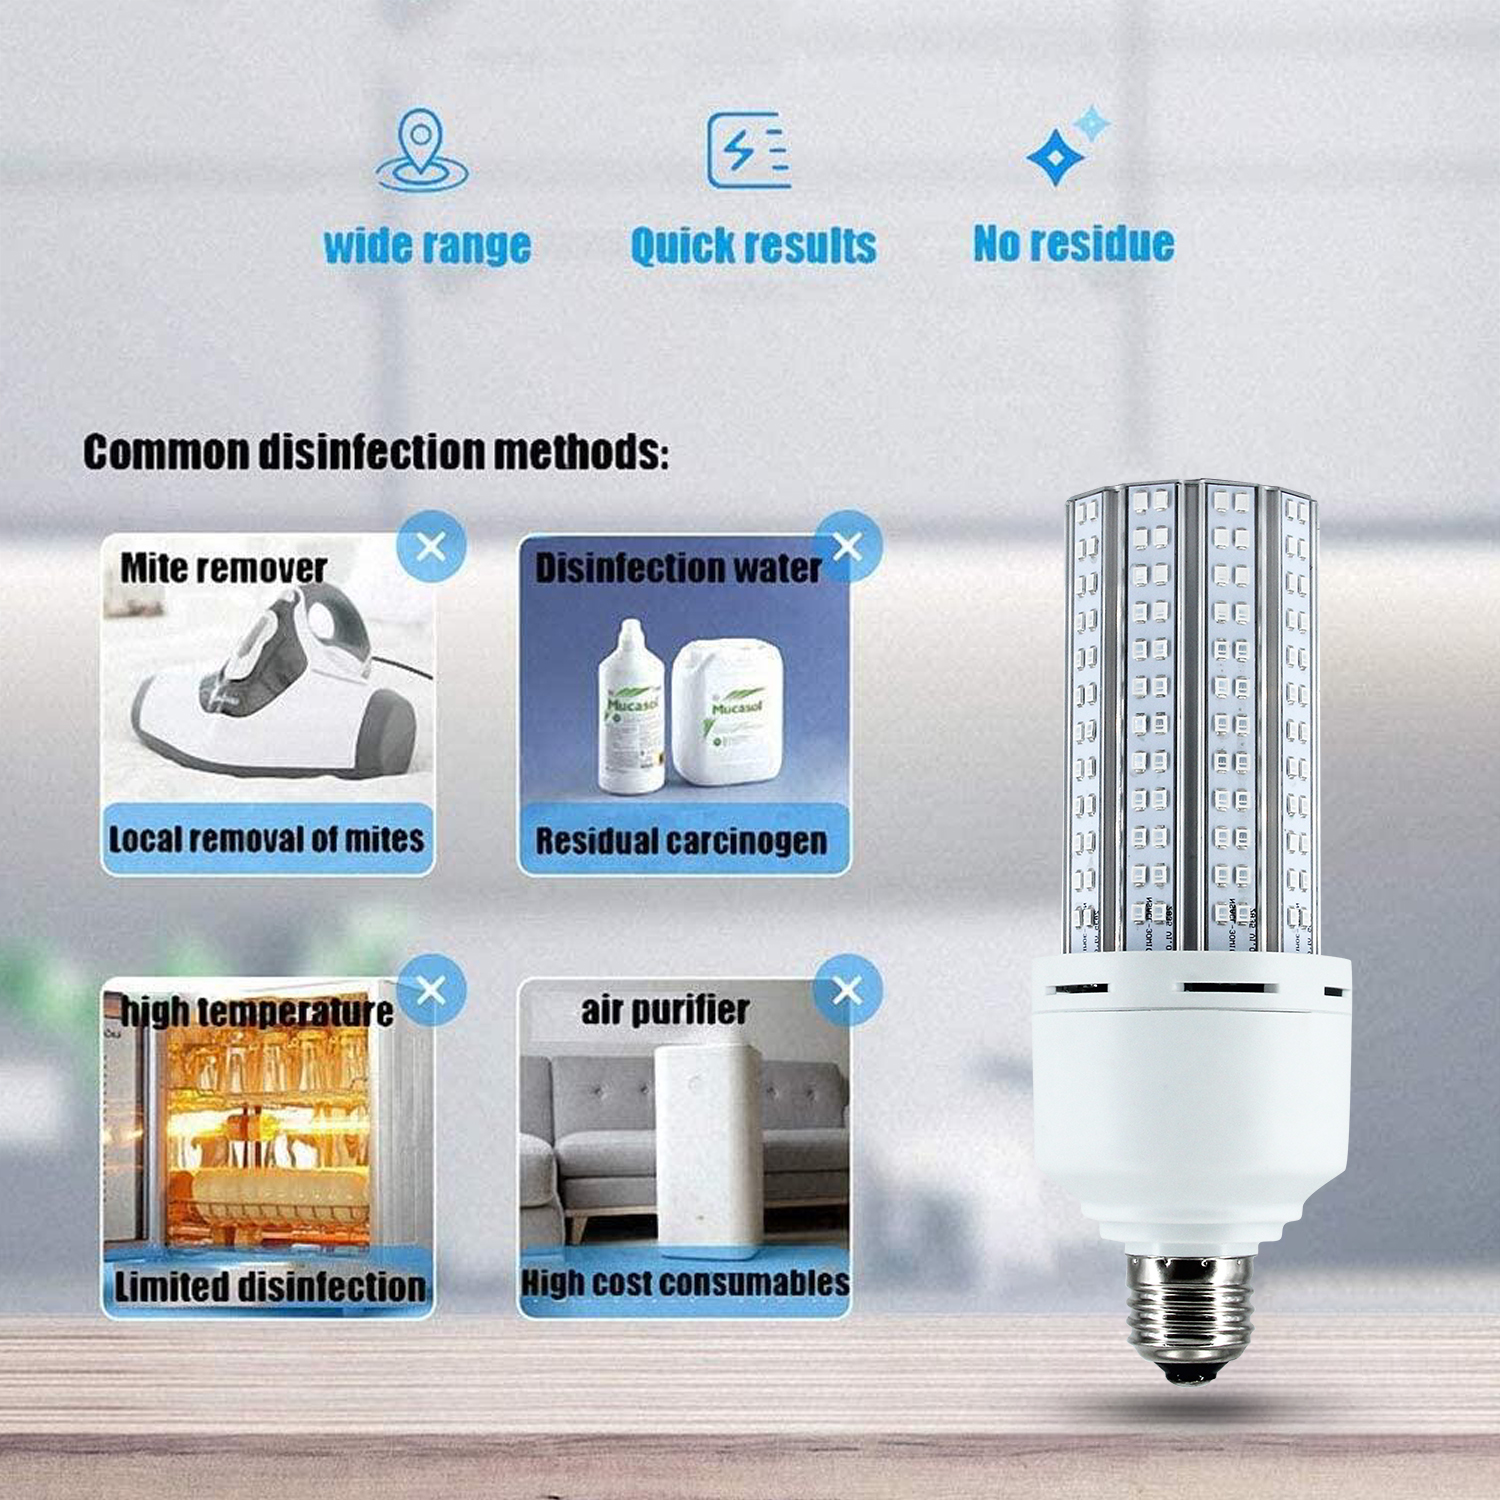 Real LED 30W (150w Watt Equivalent) UVC Germicidal Lamp, Double Effect,Report Available